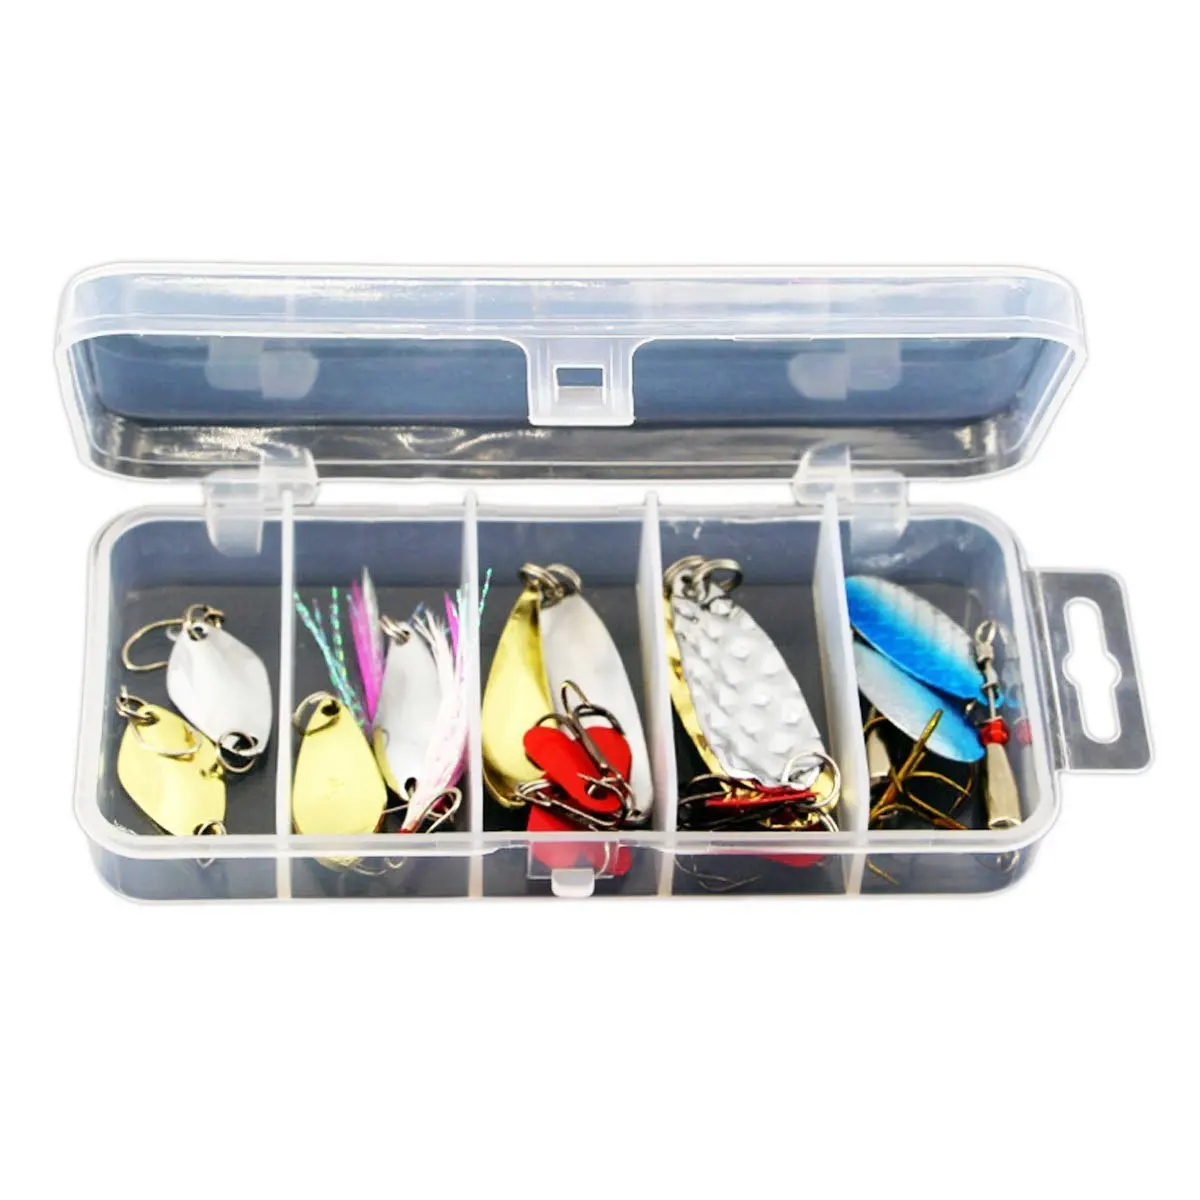 30/10pcs Premium Metal Fishing Lures Kit With Plastic Storage Box Perfect  For Trout, Pike, Perch, Bass, And Salmon Fishing Includes Spinning Fishi, Spinner Bait Storage